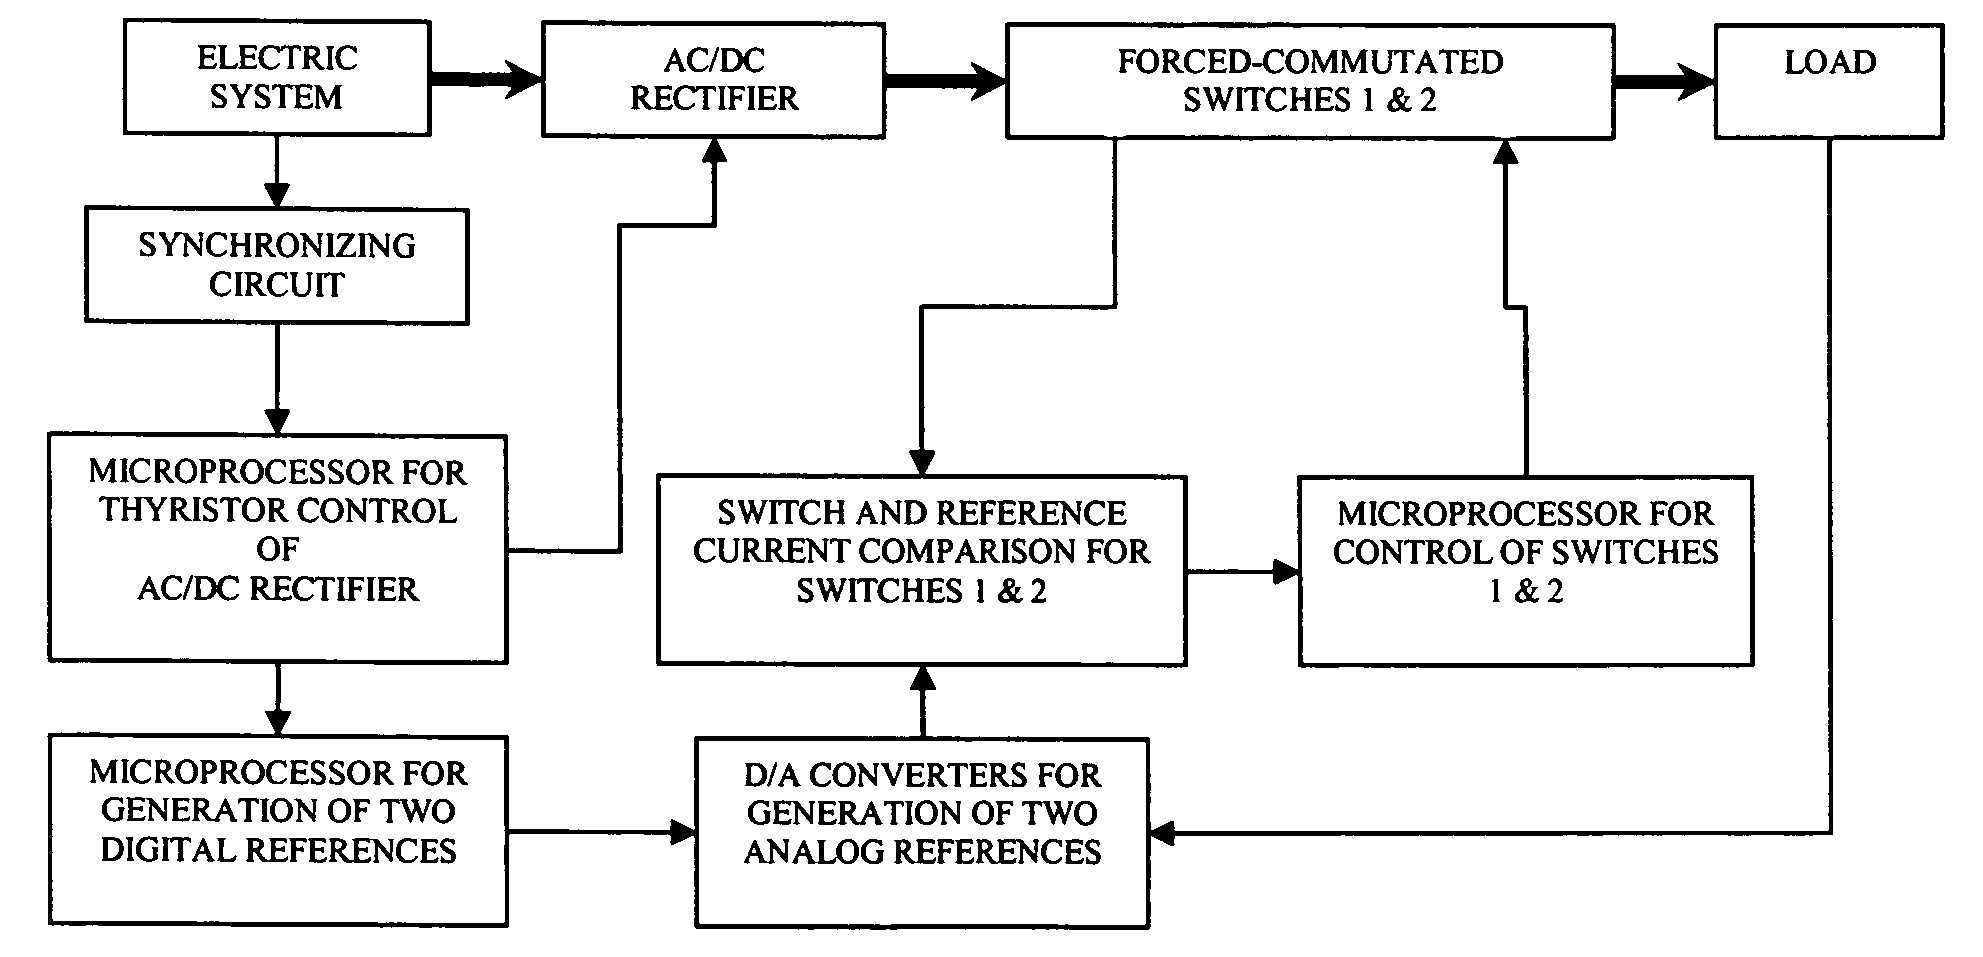 Method and apparatus to reduce distortion of currents feeding an AC/DC rectifier system